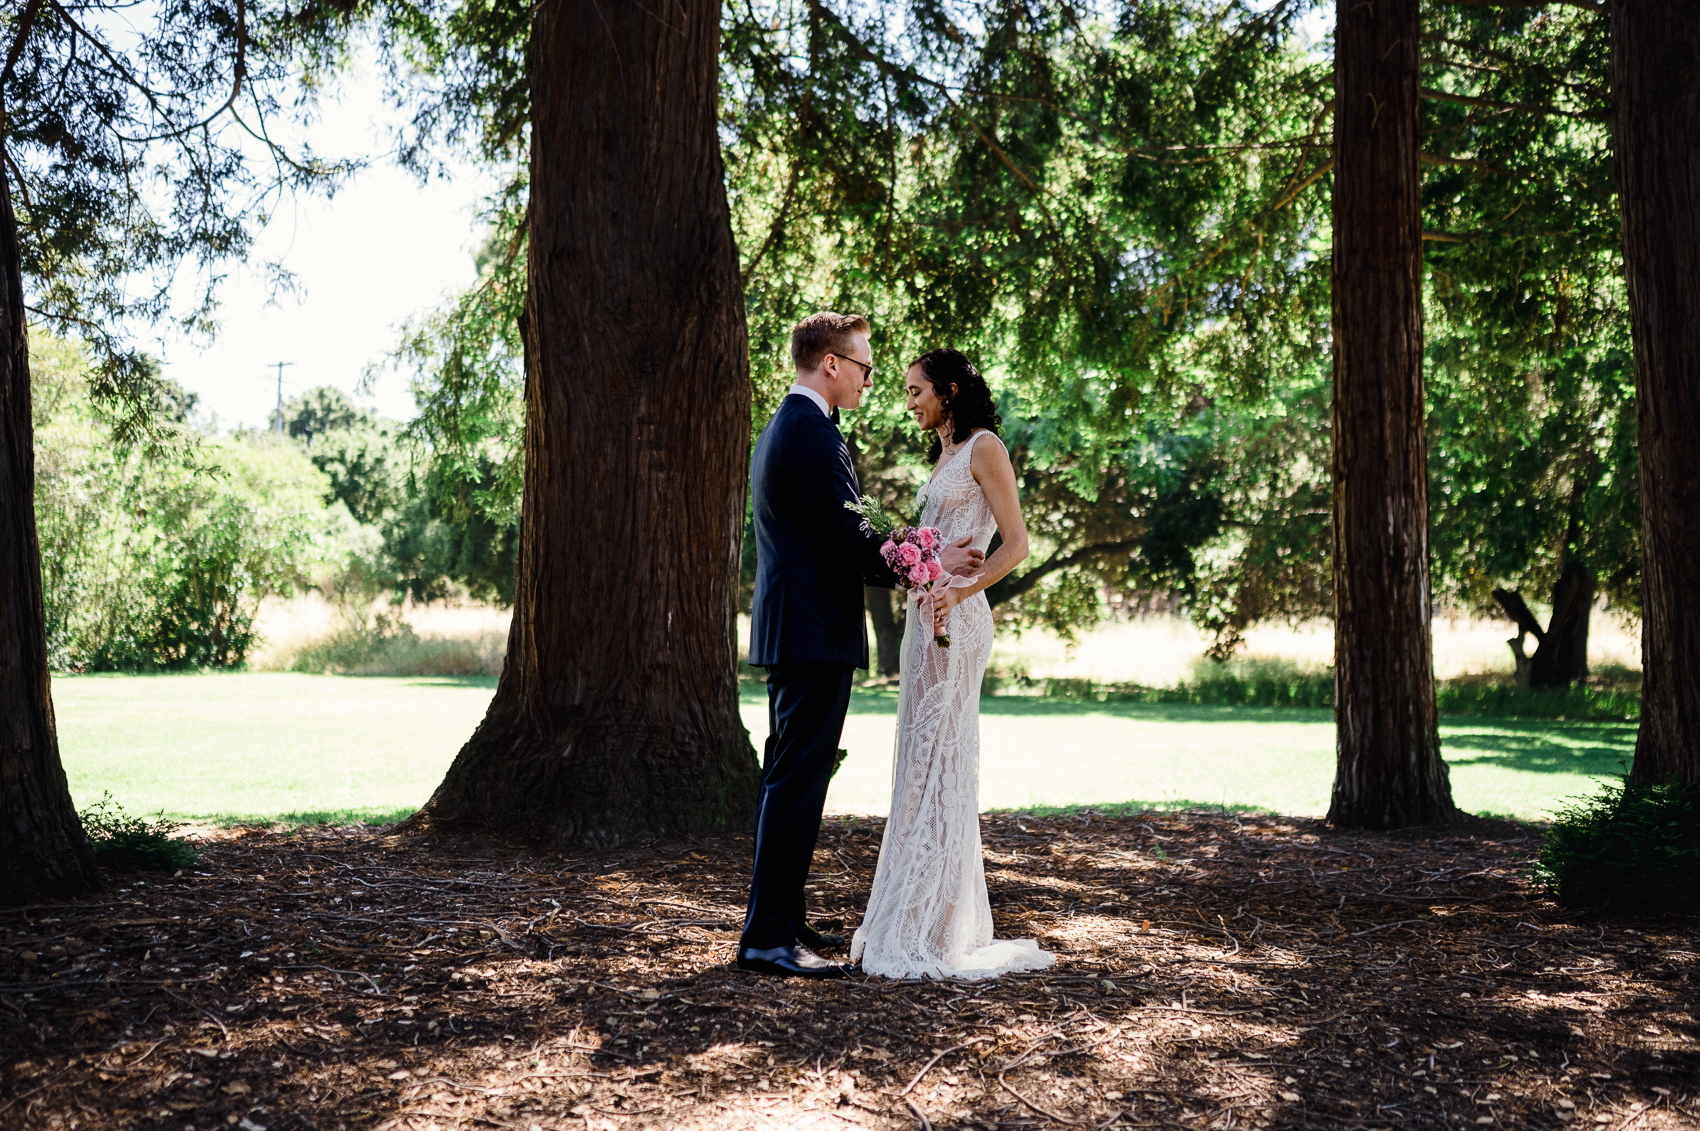 Intimate backyard wedding ceremony surrounded by lush greenery in Palo Alto, California.